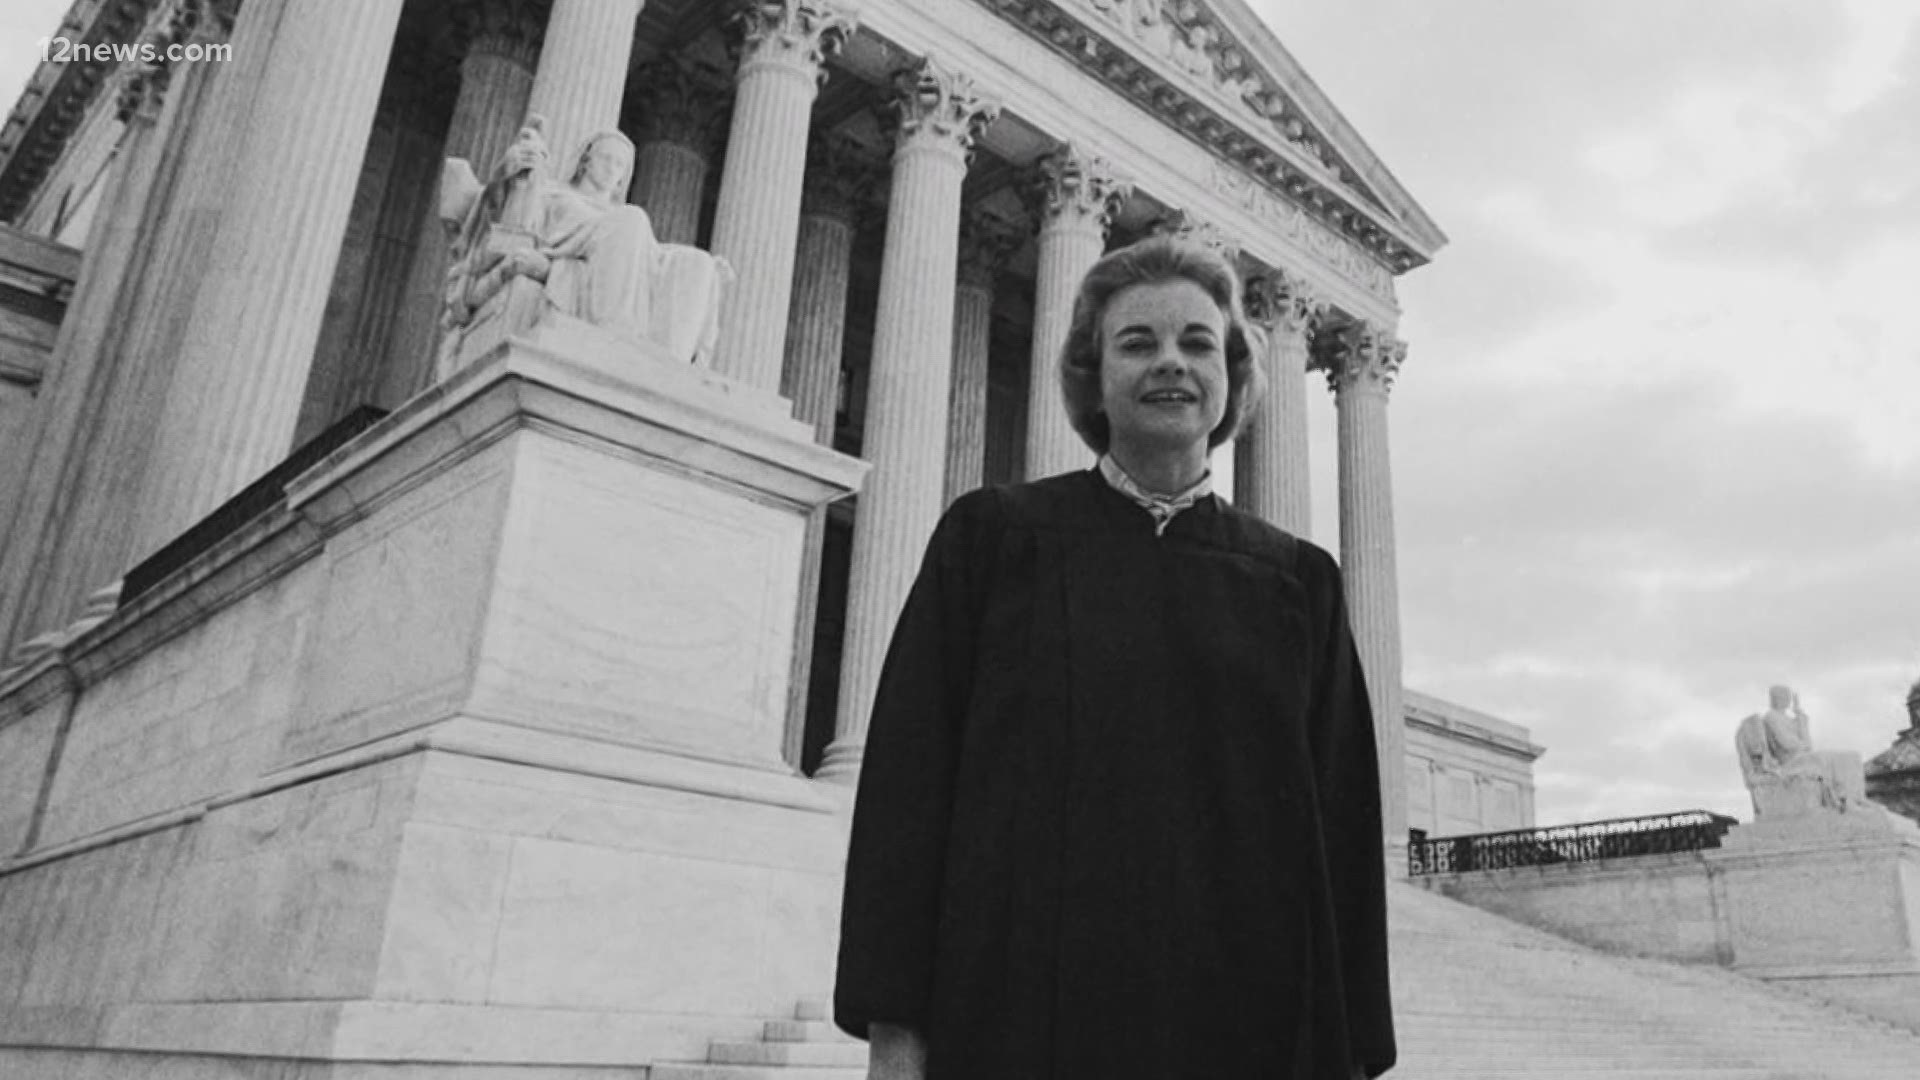 We're looking back on the life and career of one of Arizona's most notable women in history on her 91st birthday: Supreme Court Justice Sandra Day O'Connor.